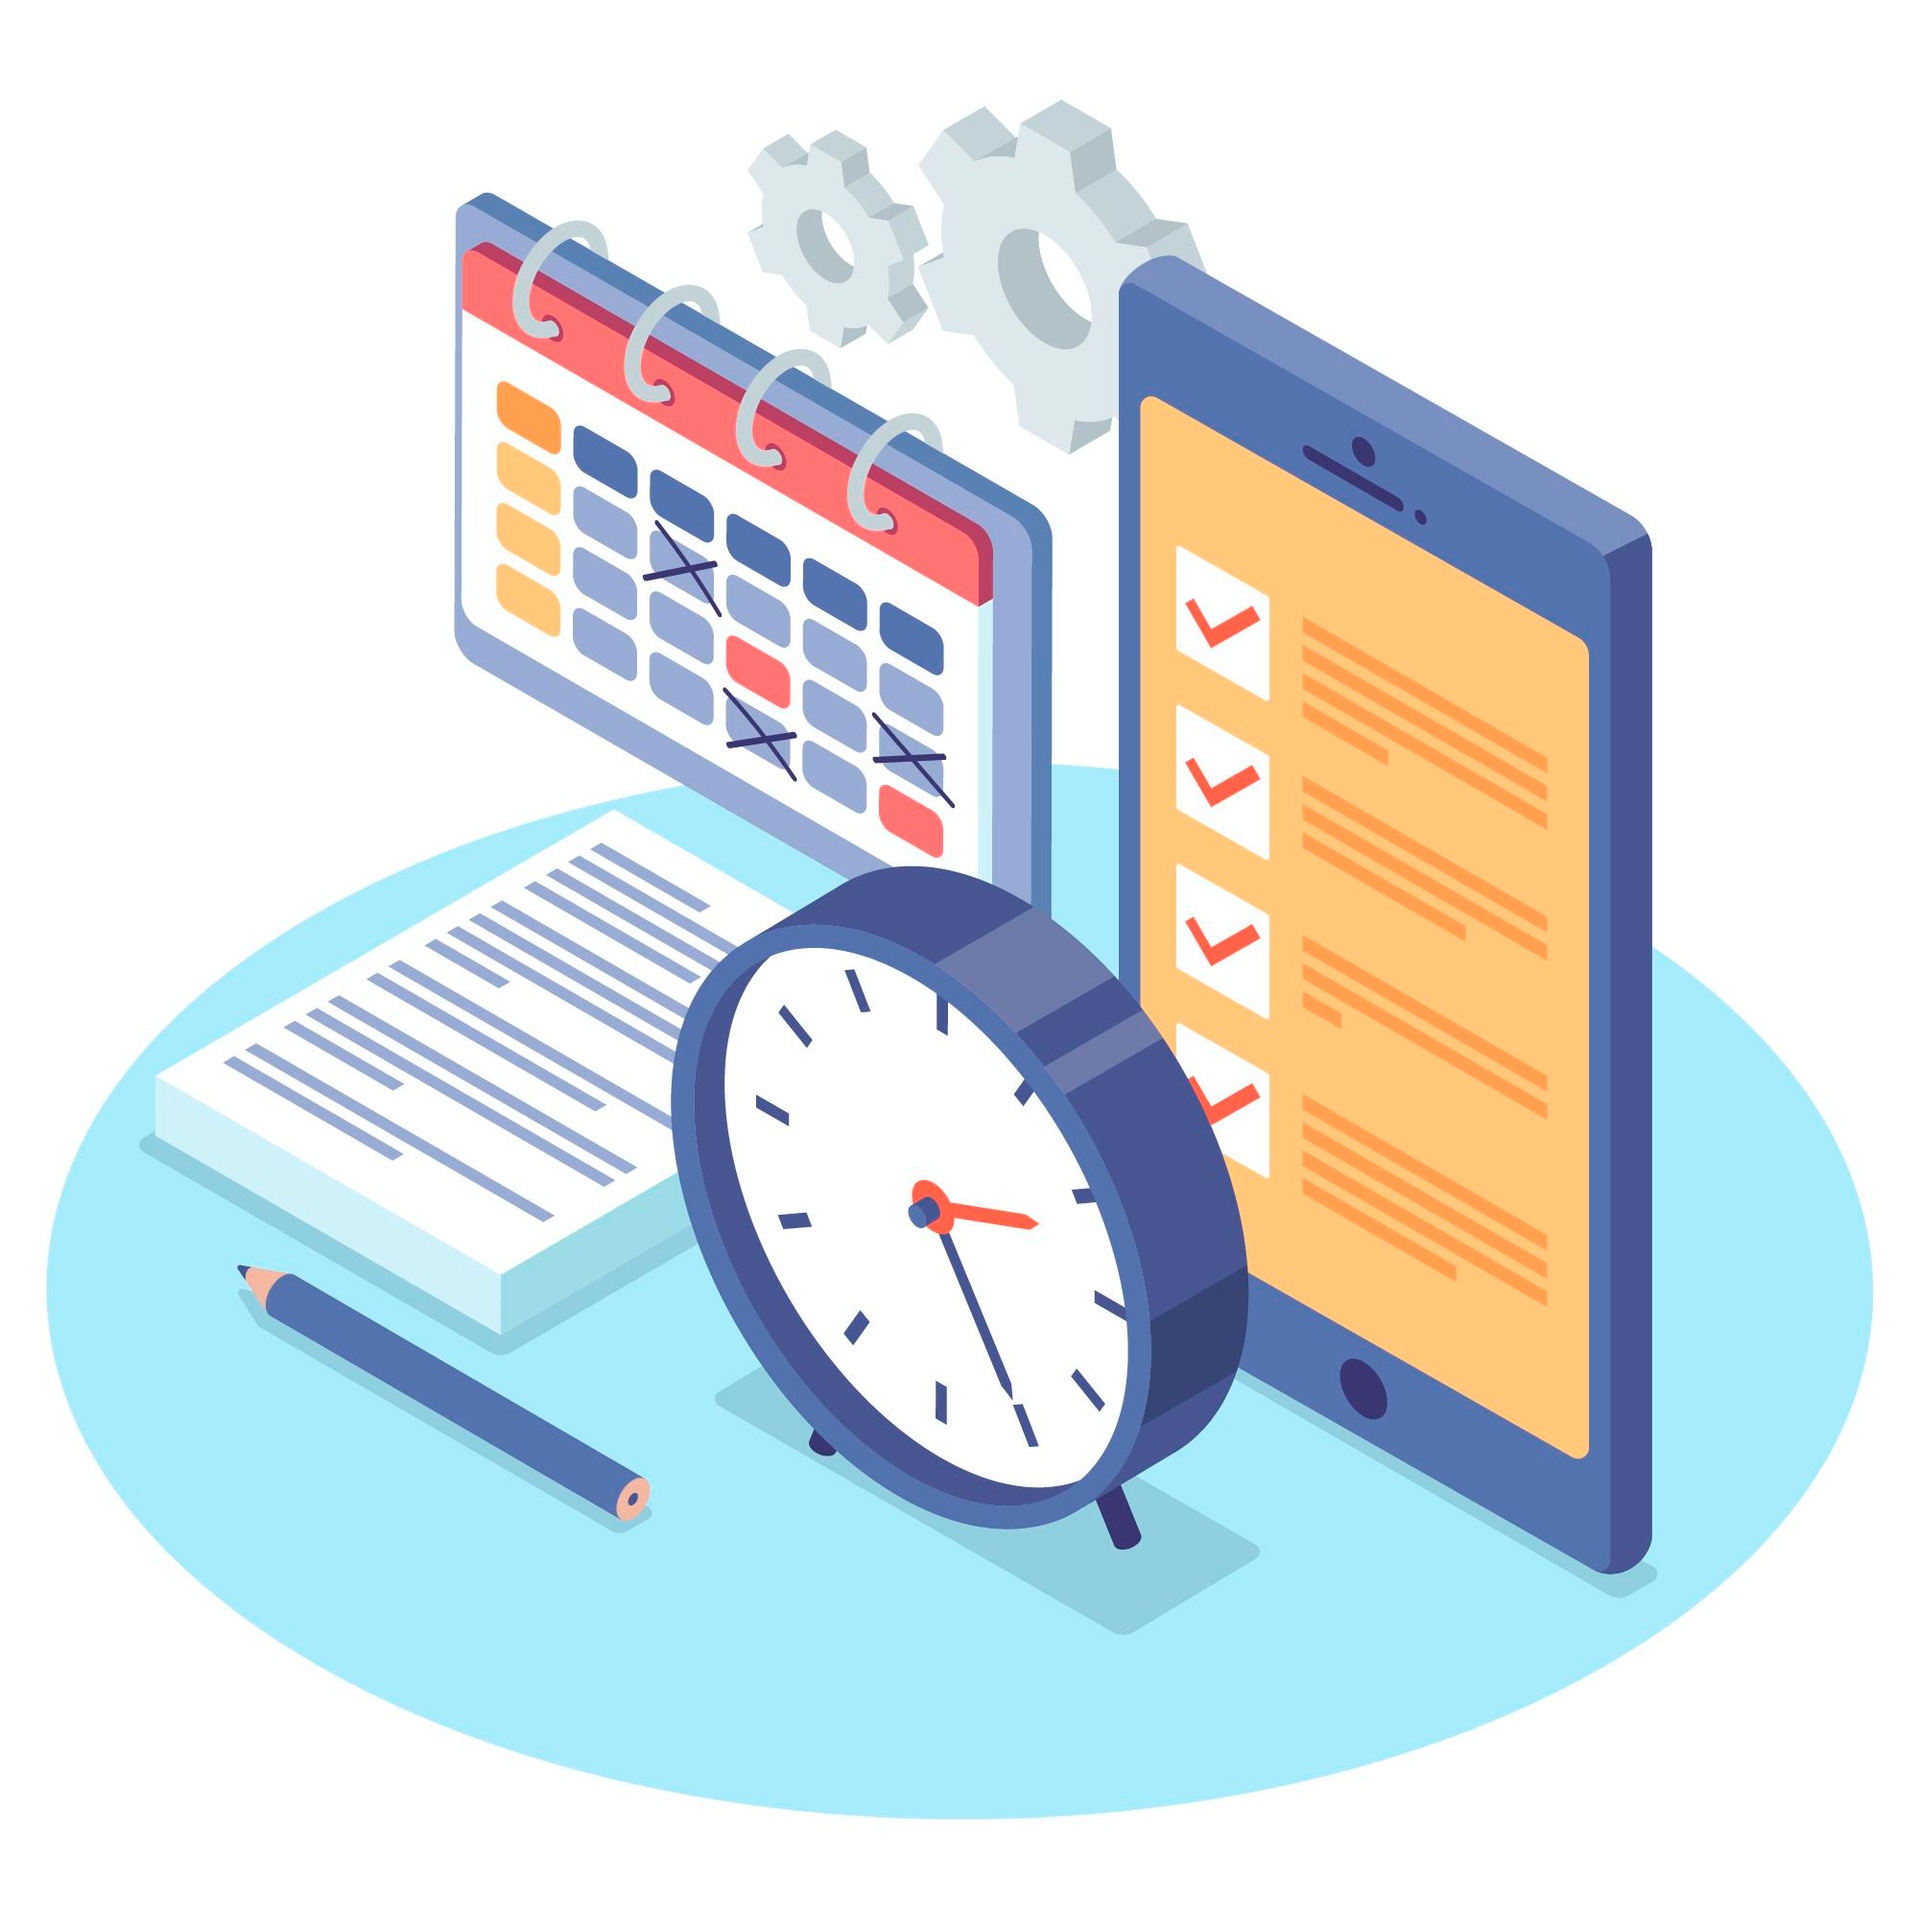 Manage your time effectively at work.